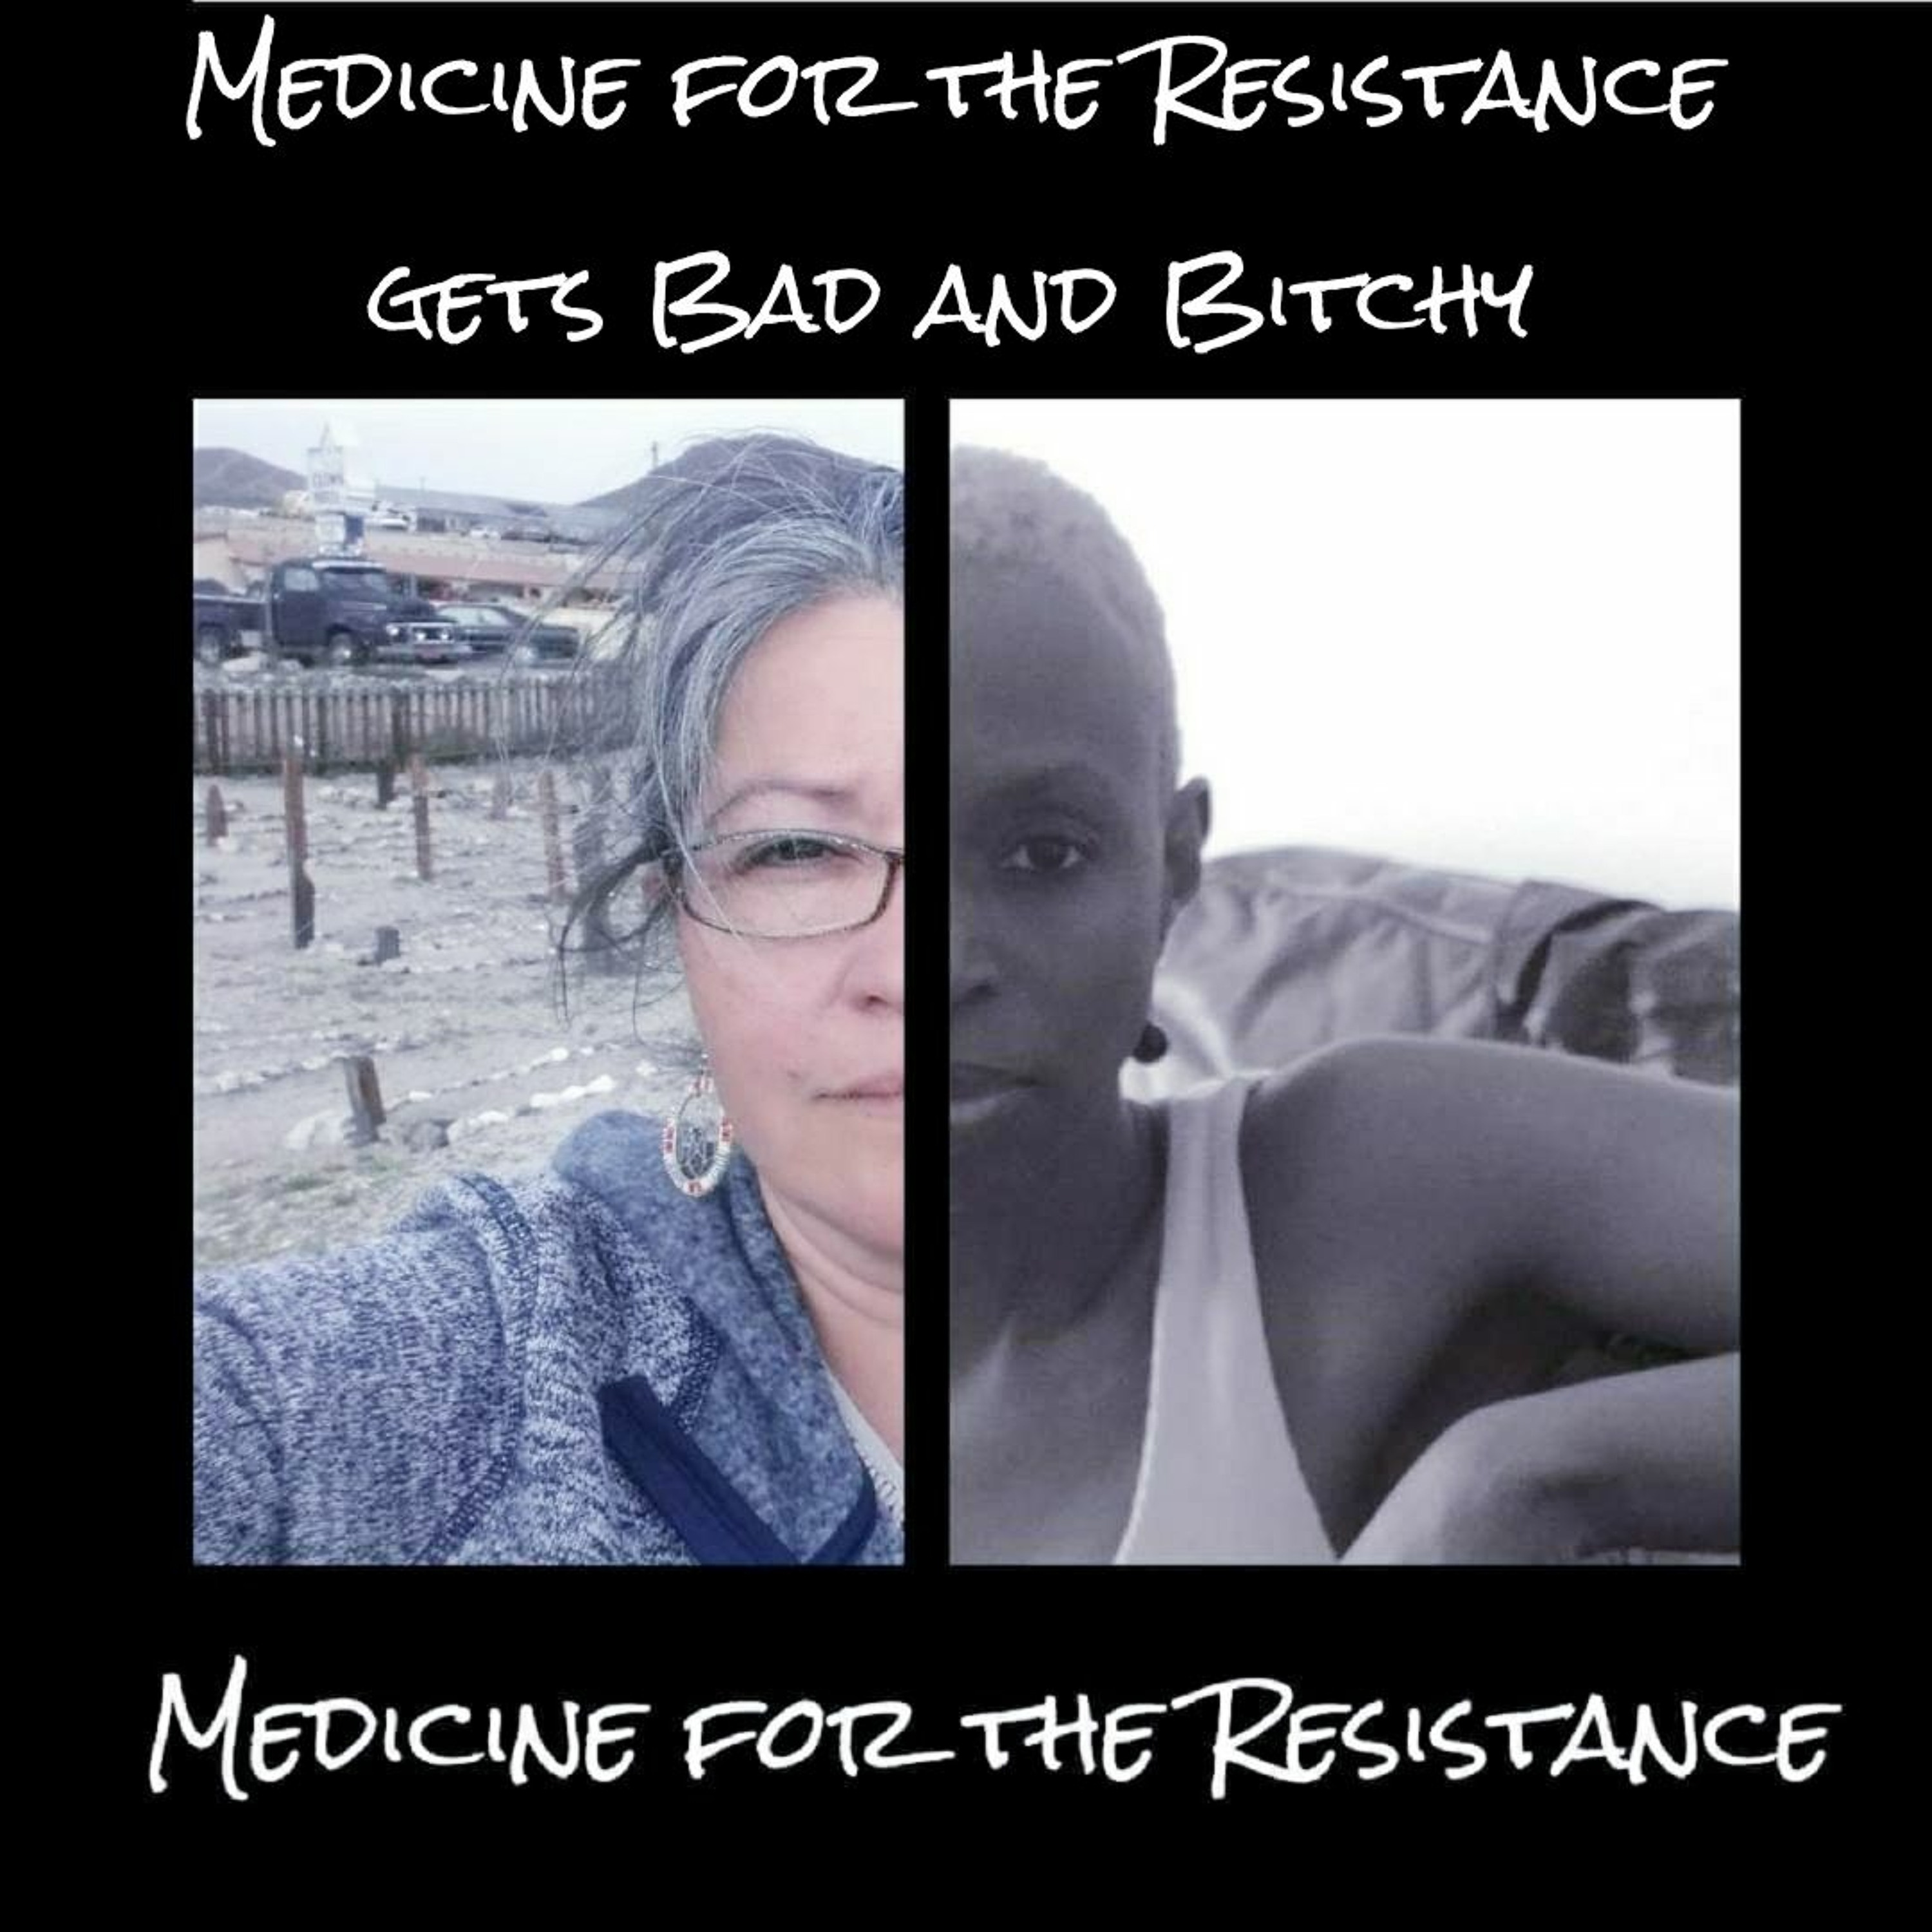 Medicine for the Resistance gets bad and b****y